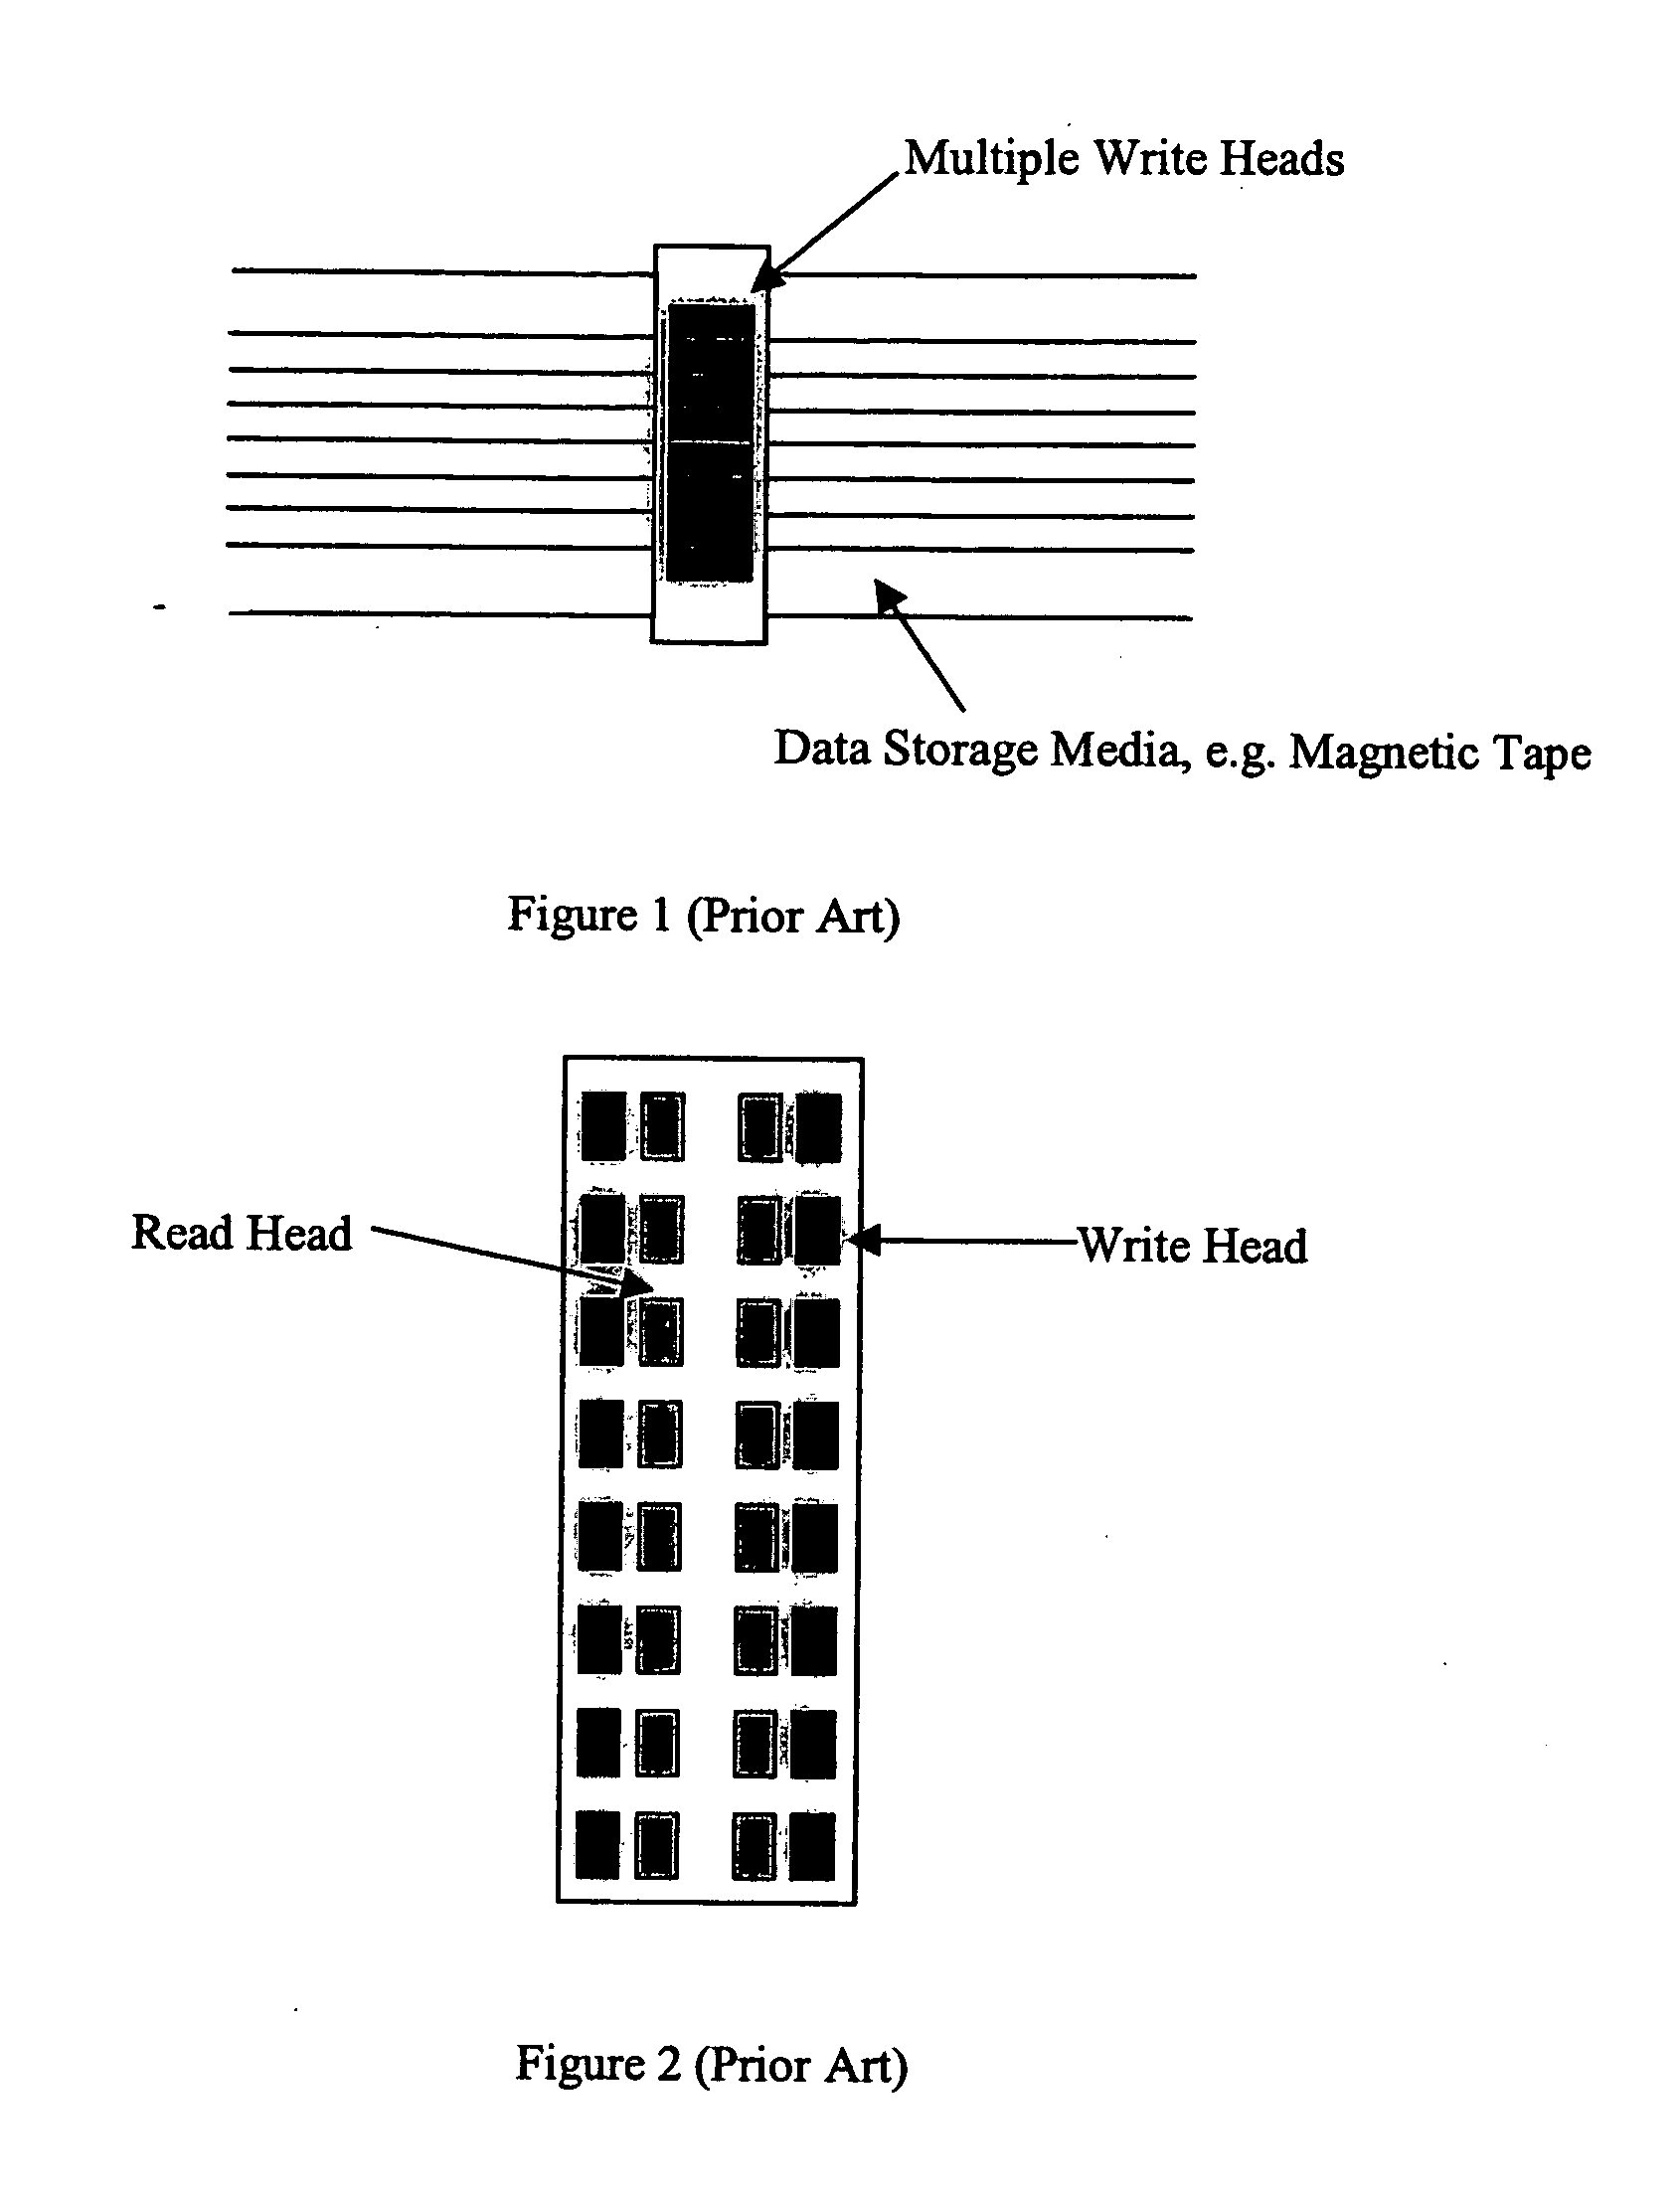 Data transfer device and method